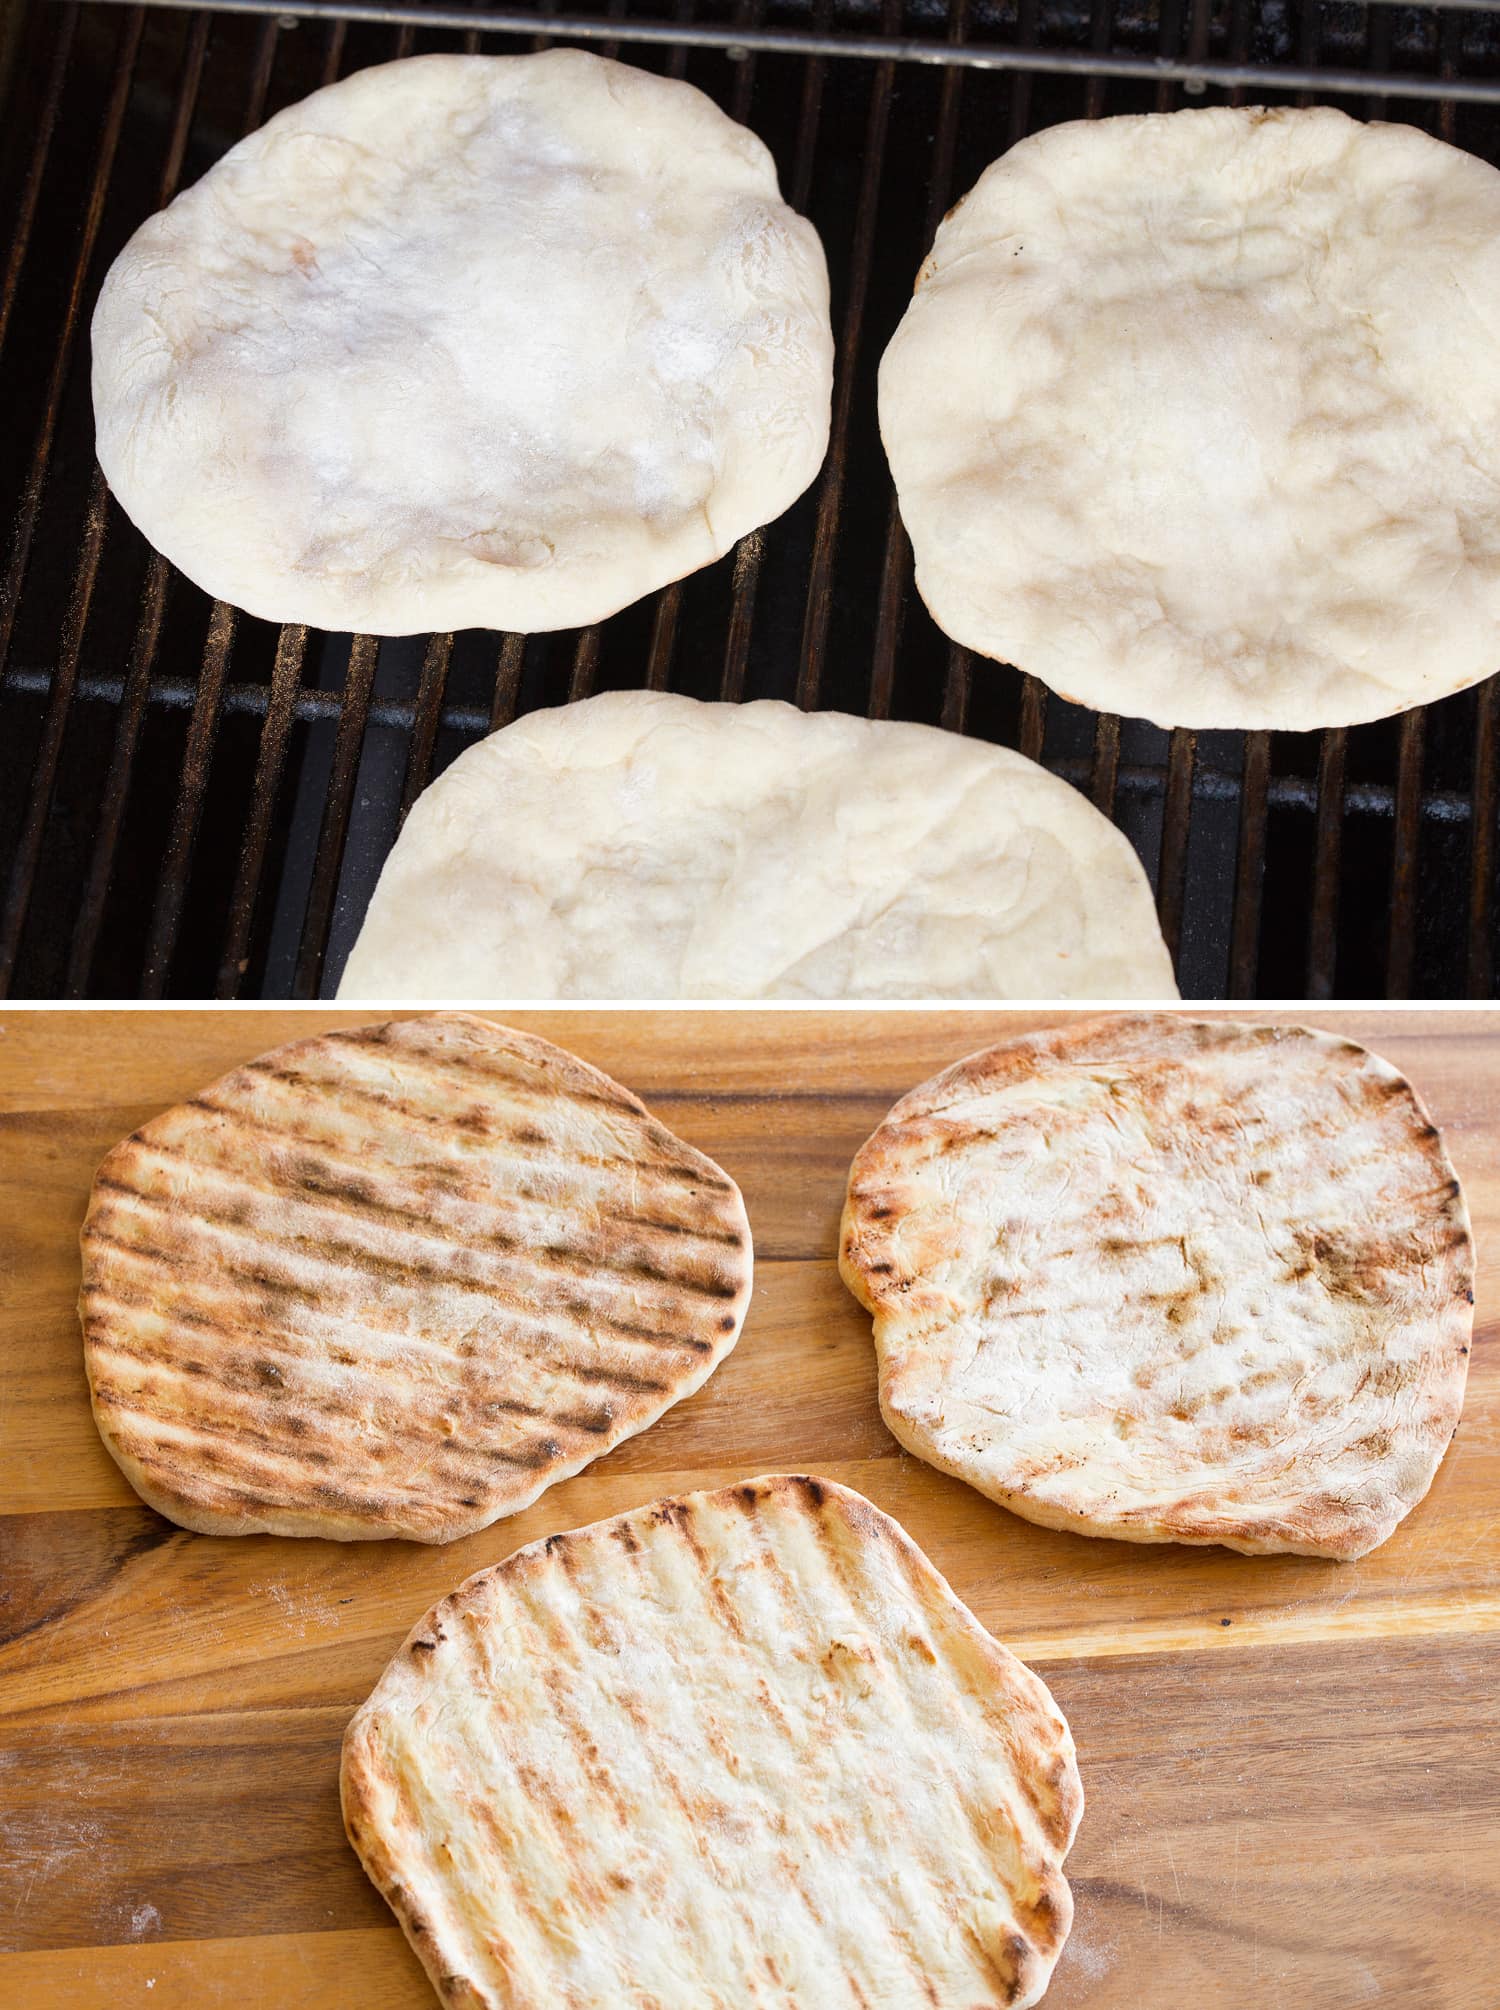 Pizza dough before and after grilling.